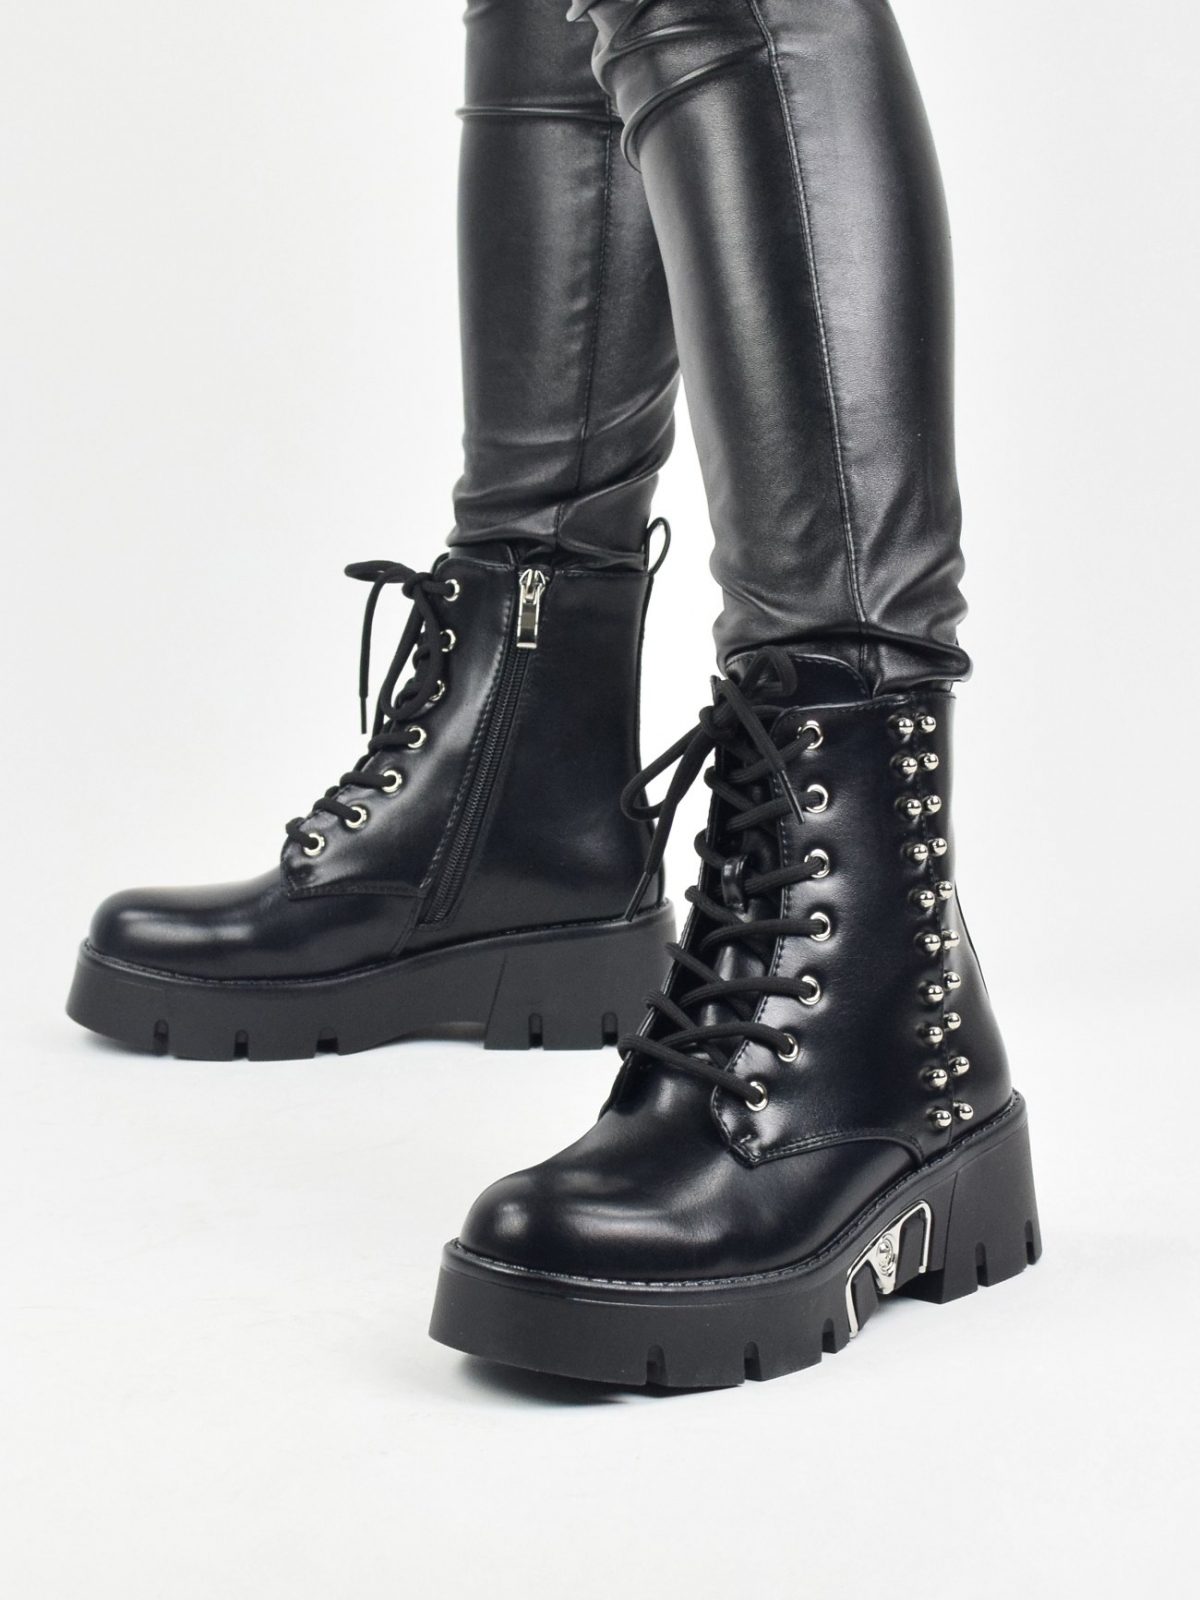 Original design ankle boots with metal details in black